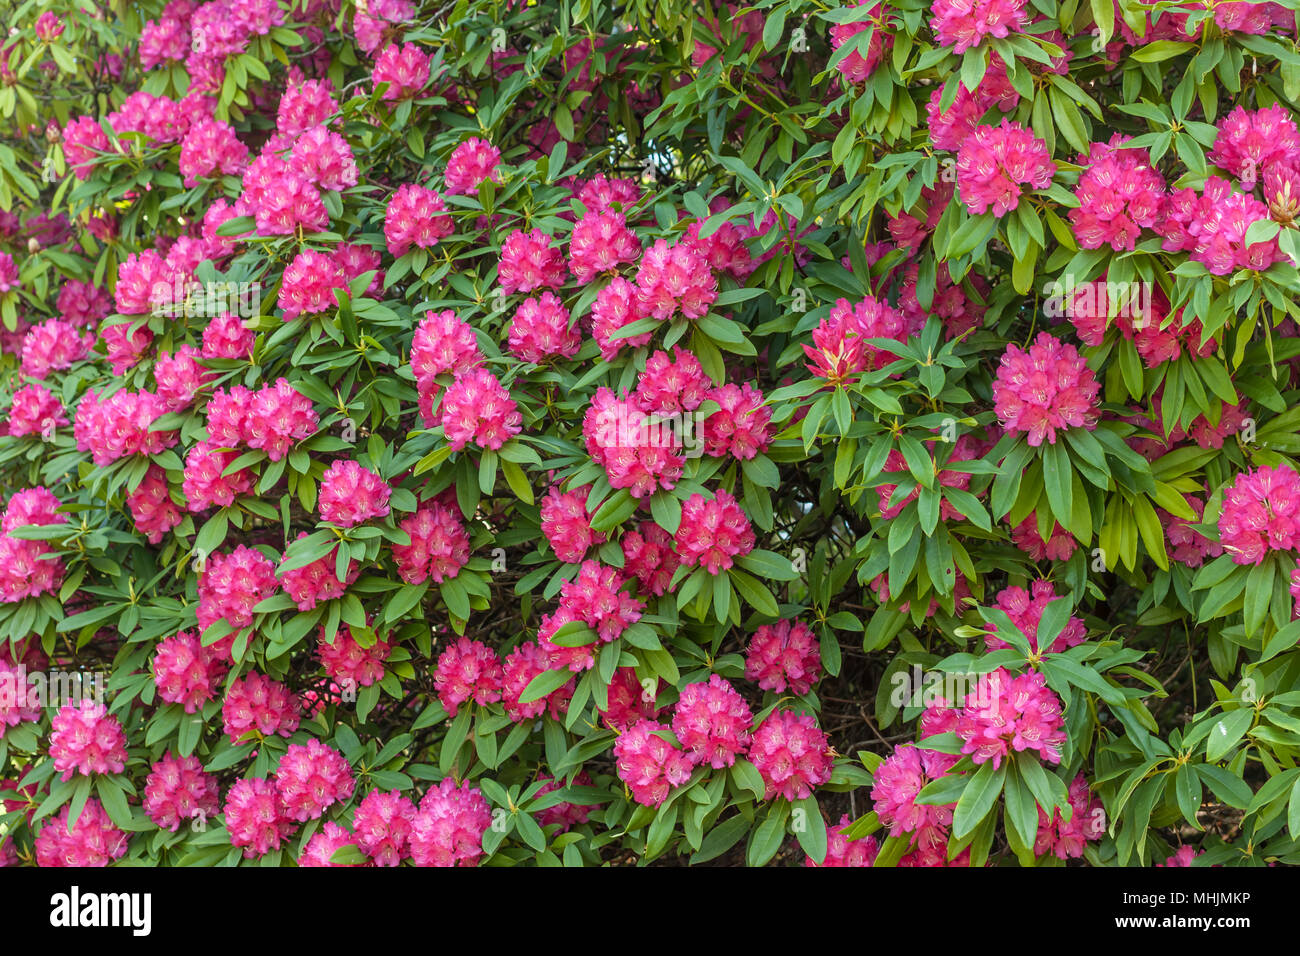 blossom of bright pink flowers Stock Photo